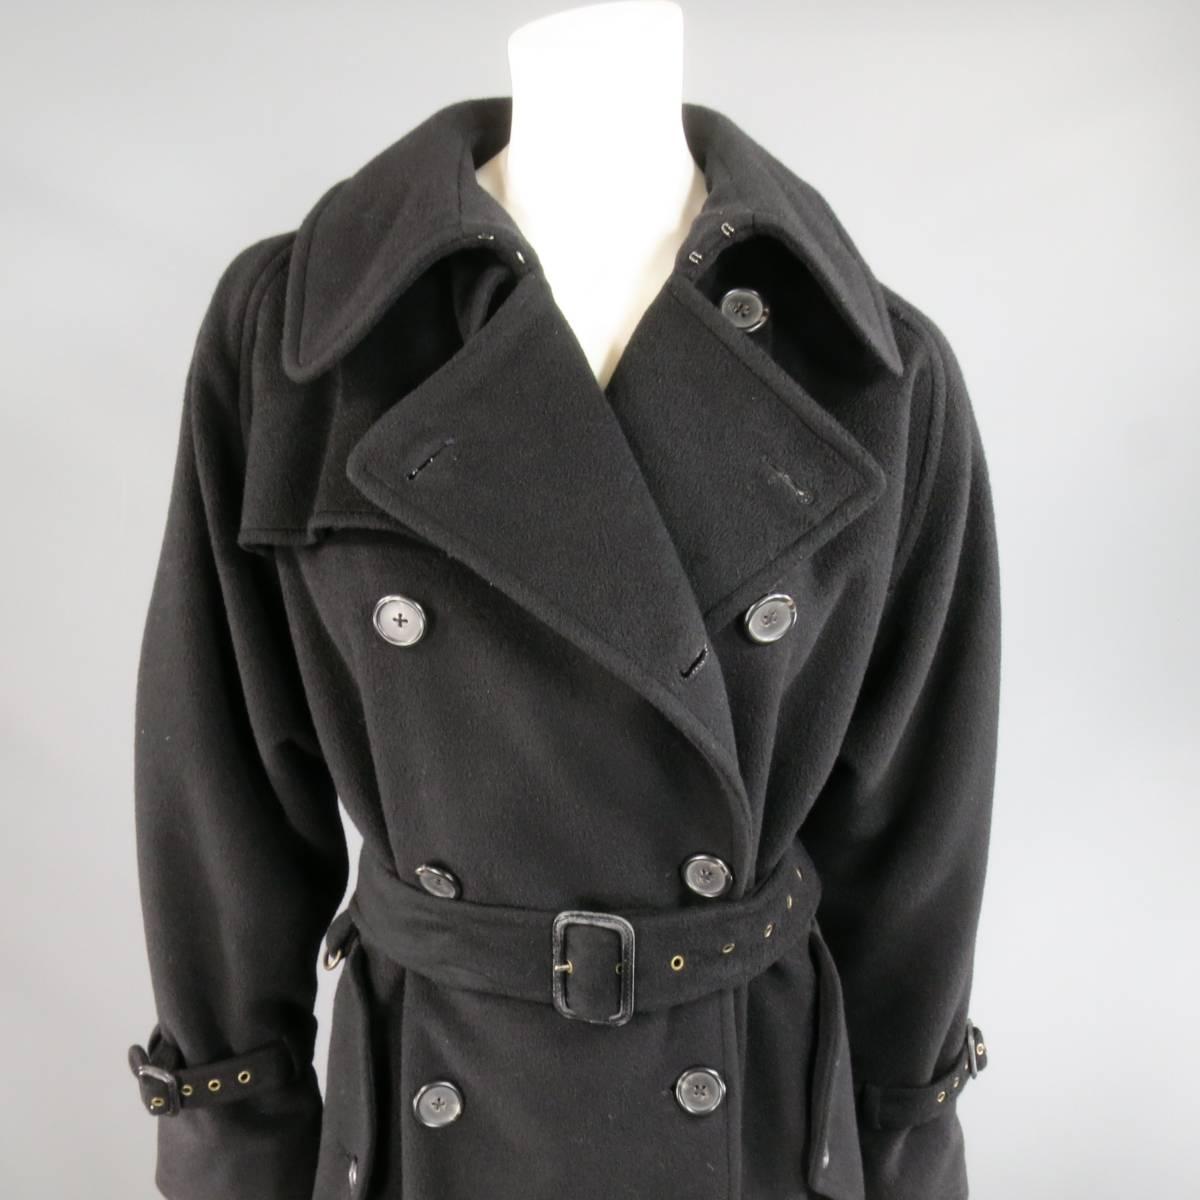 This gorgeous vintage RALPH LAUREN PURPLE LABEL trench coat comes in a soft wool blend fleece material and features a large pointed collar, double breasted button up closure, storm flap detail, double slanted flap pockets, raglan sleeves with gold